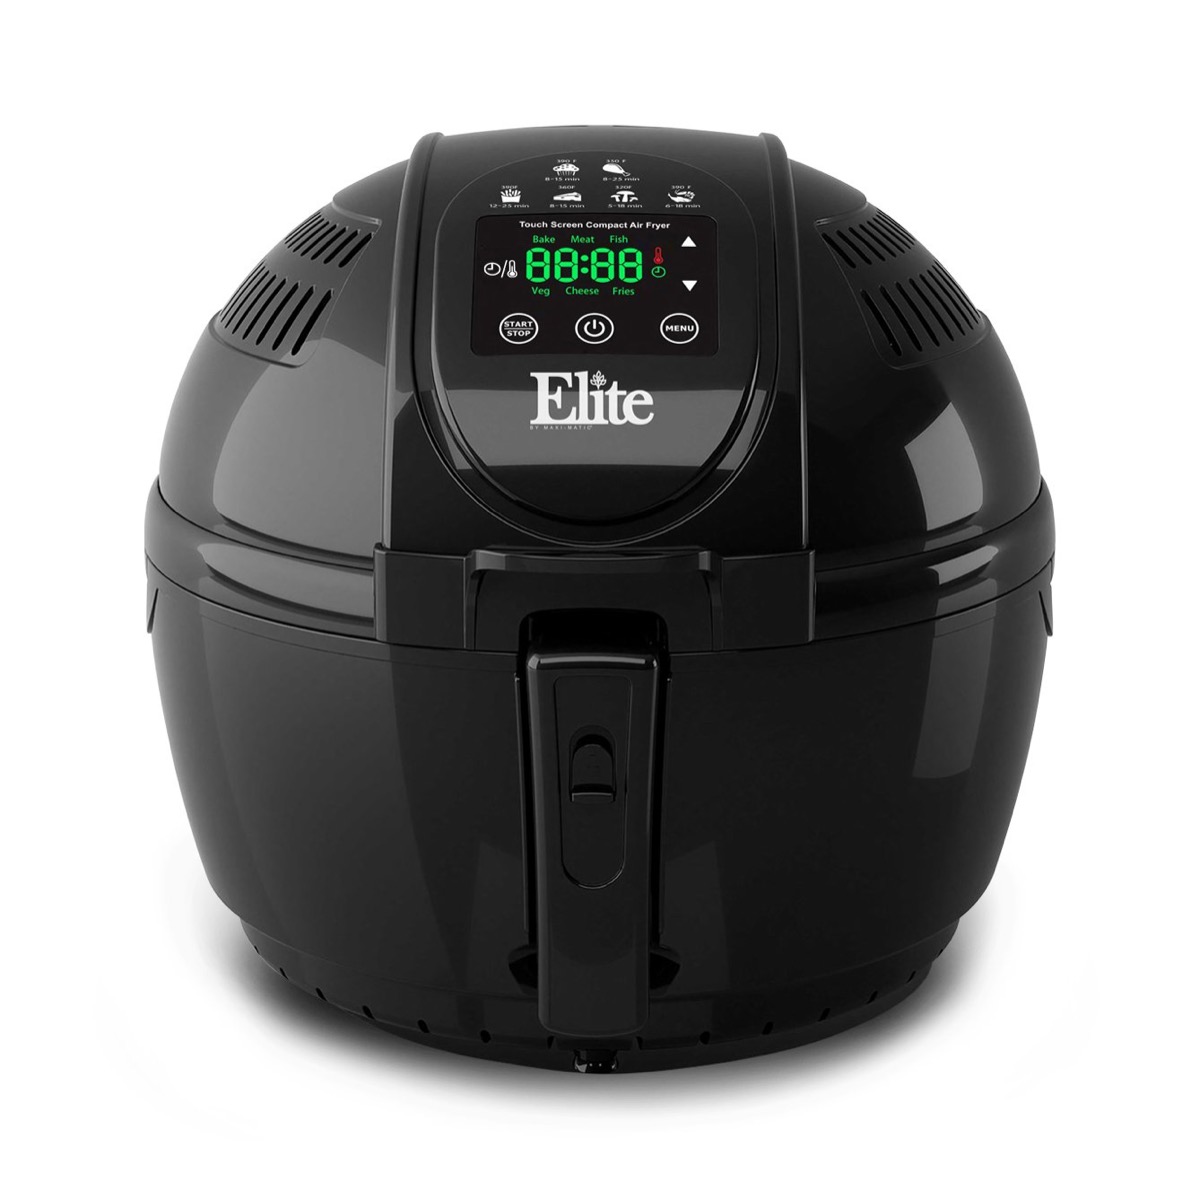 Elite Air Fryer Mother's Day Gifts